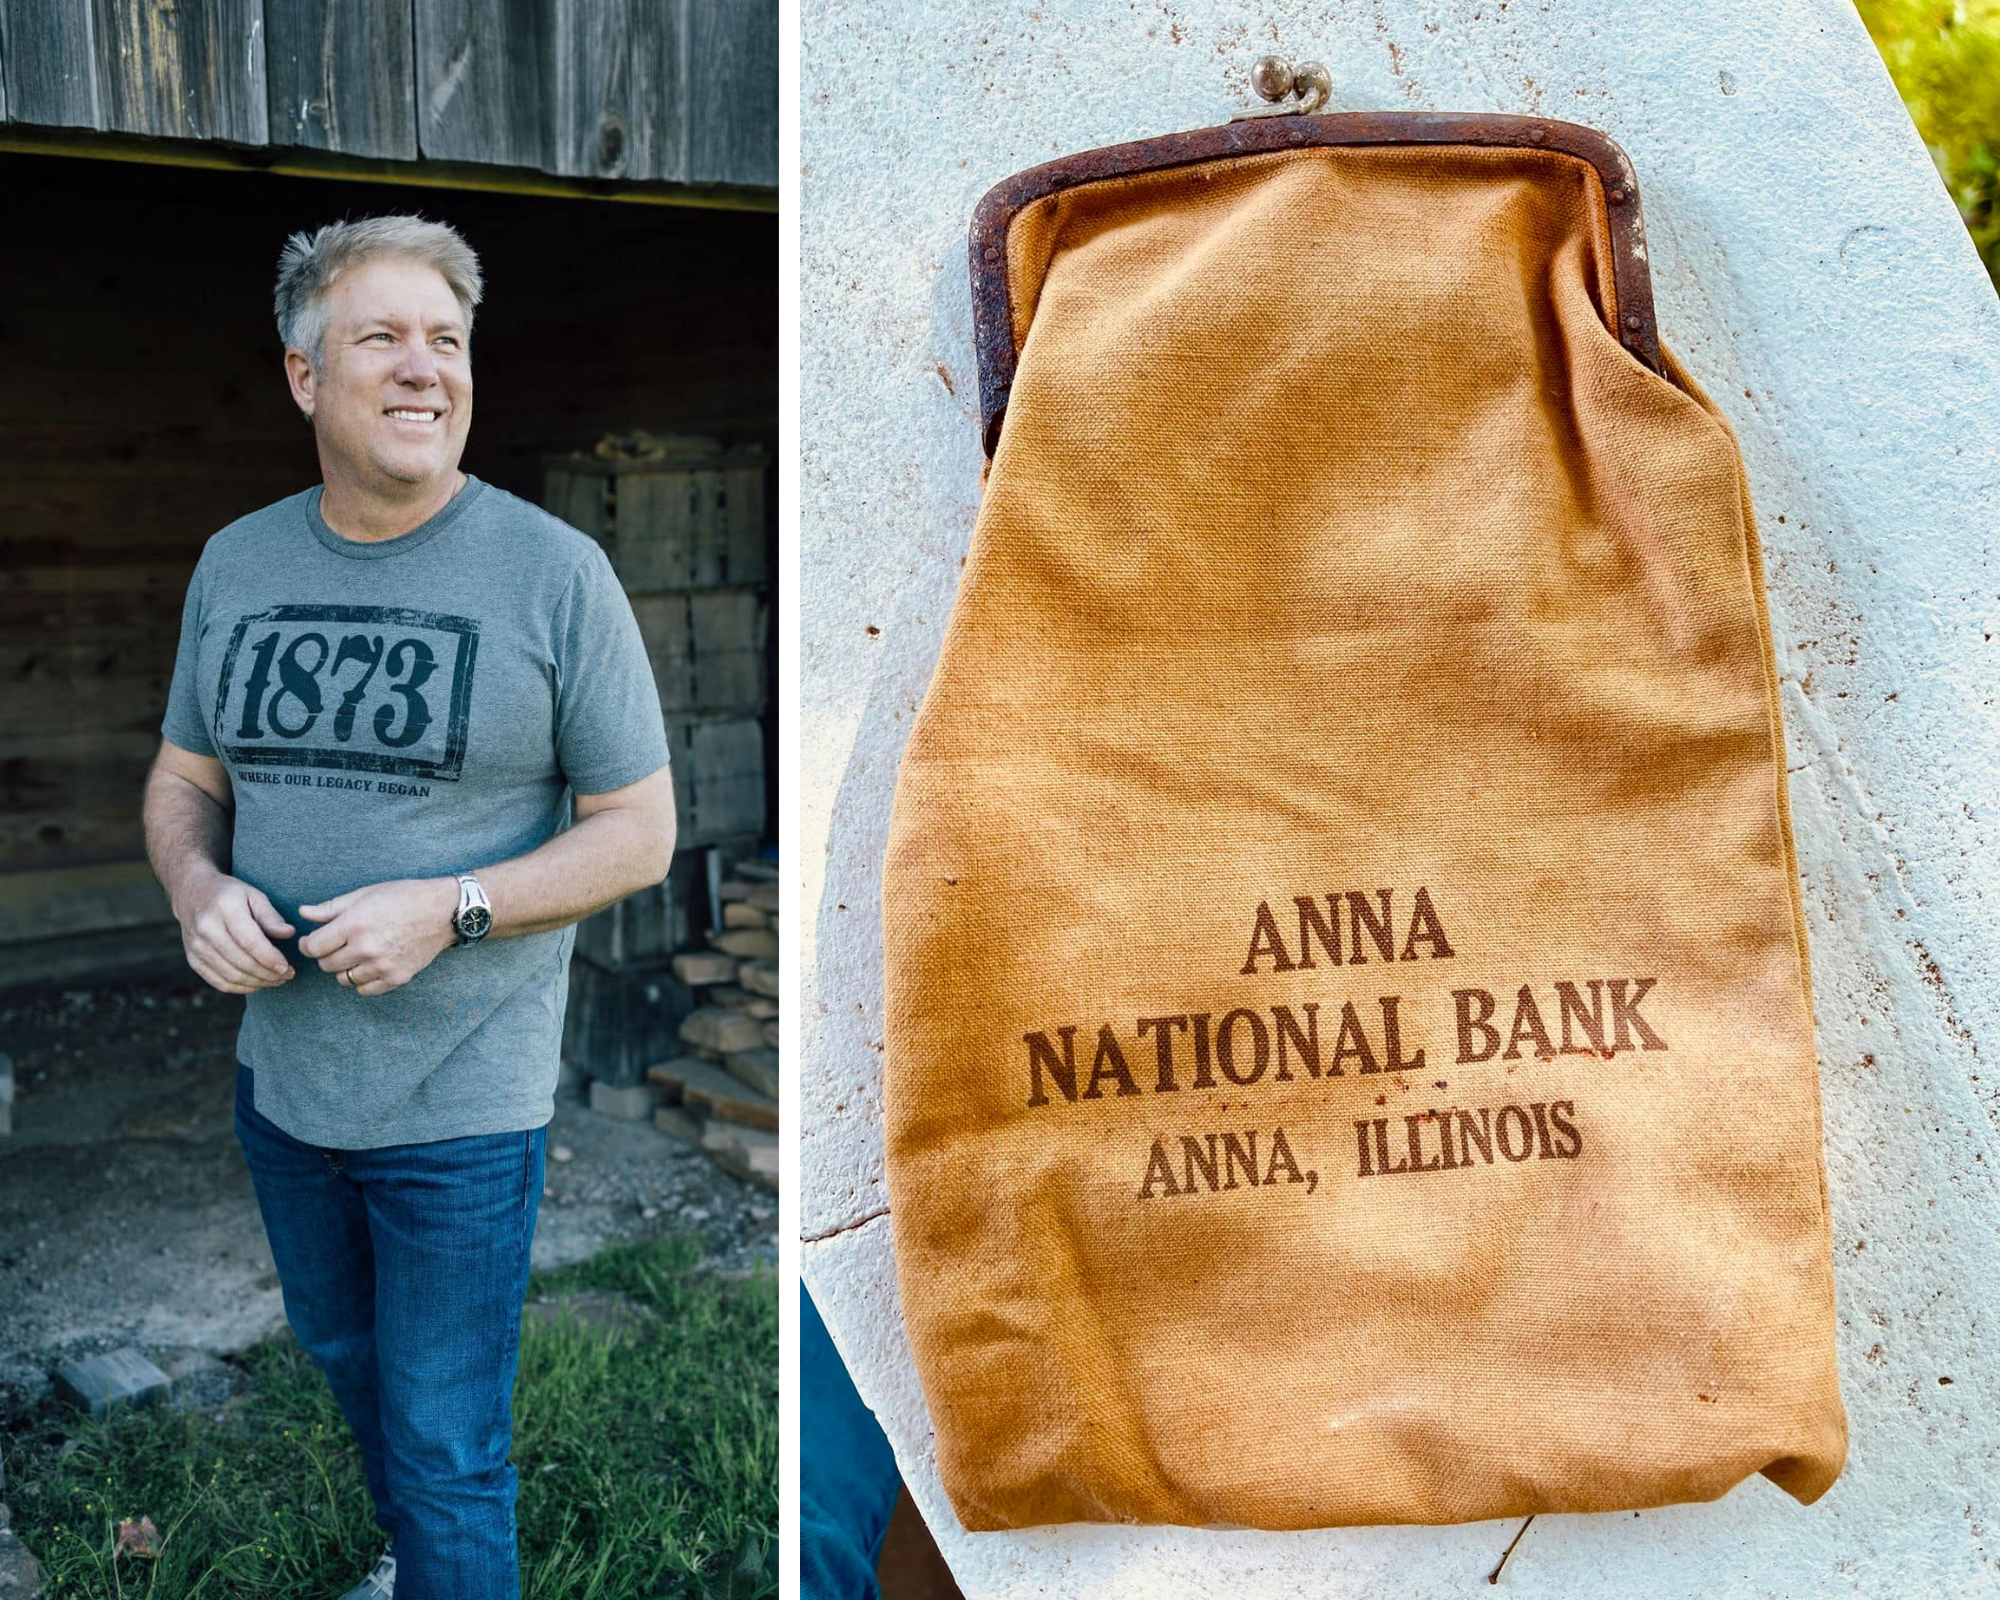 Photo collage. Left Image: Wayne Sirles stands by old barn entry wearing gray "1873" graphic t-shirt. Right Image: Antique bank bag with text saying "Anna National Bank."